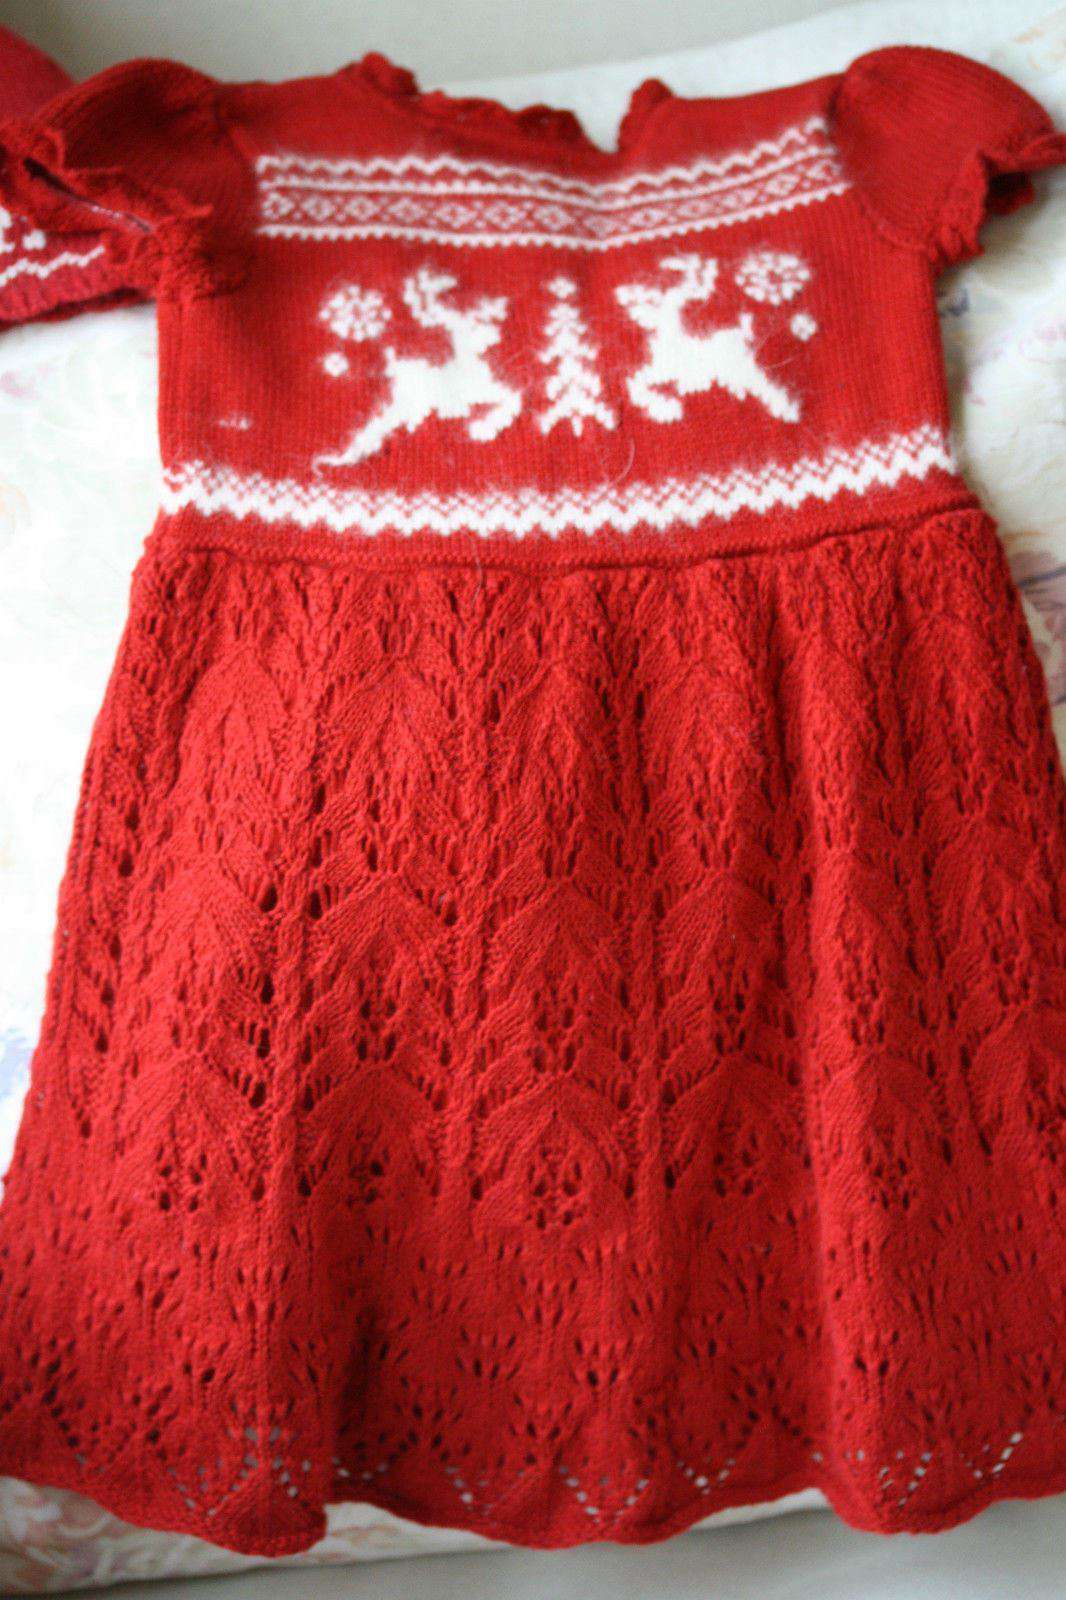 RALPH LAUREN BABY CABLE INTARSIA DRESS AND HAT 12 MONTHS